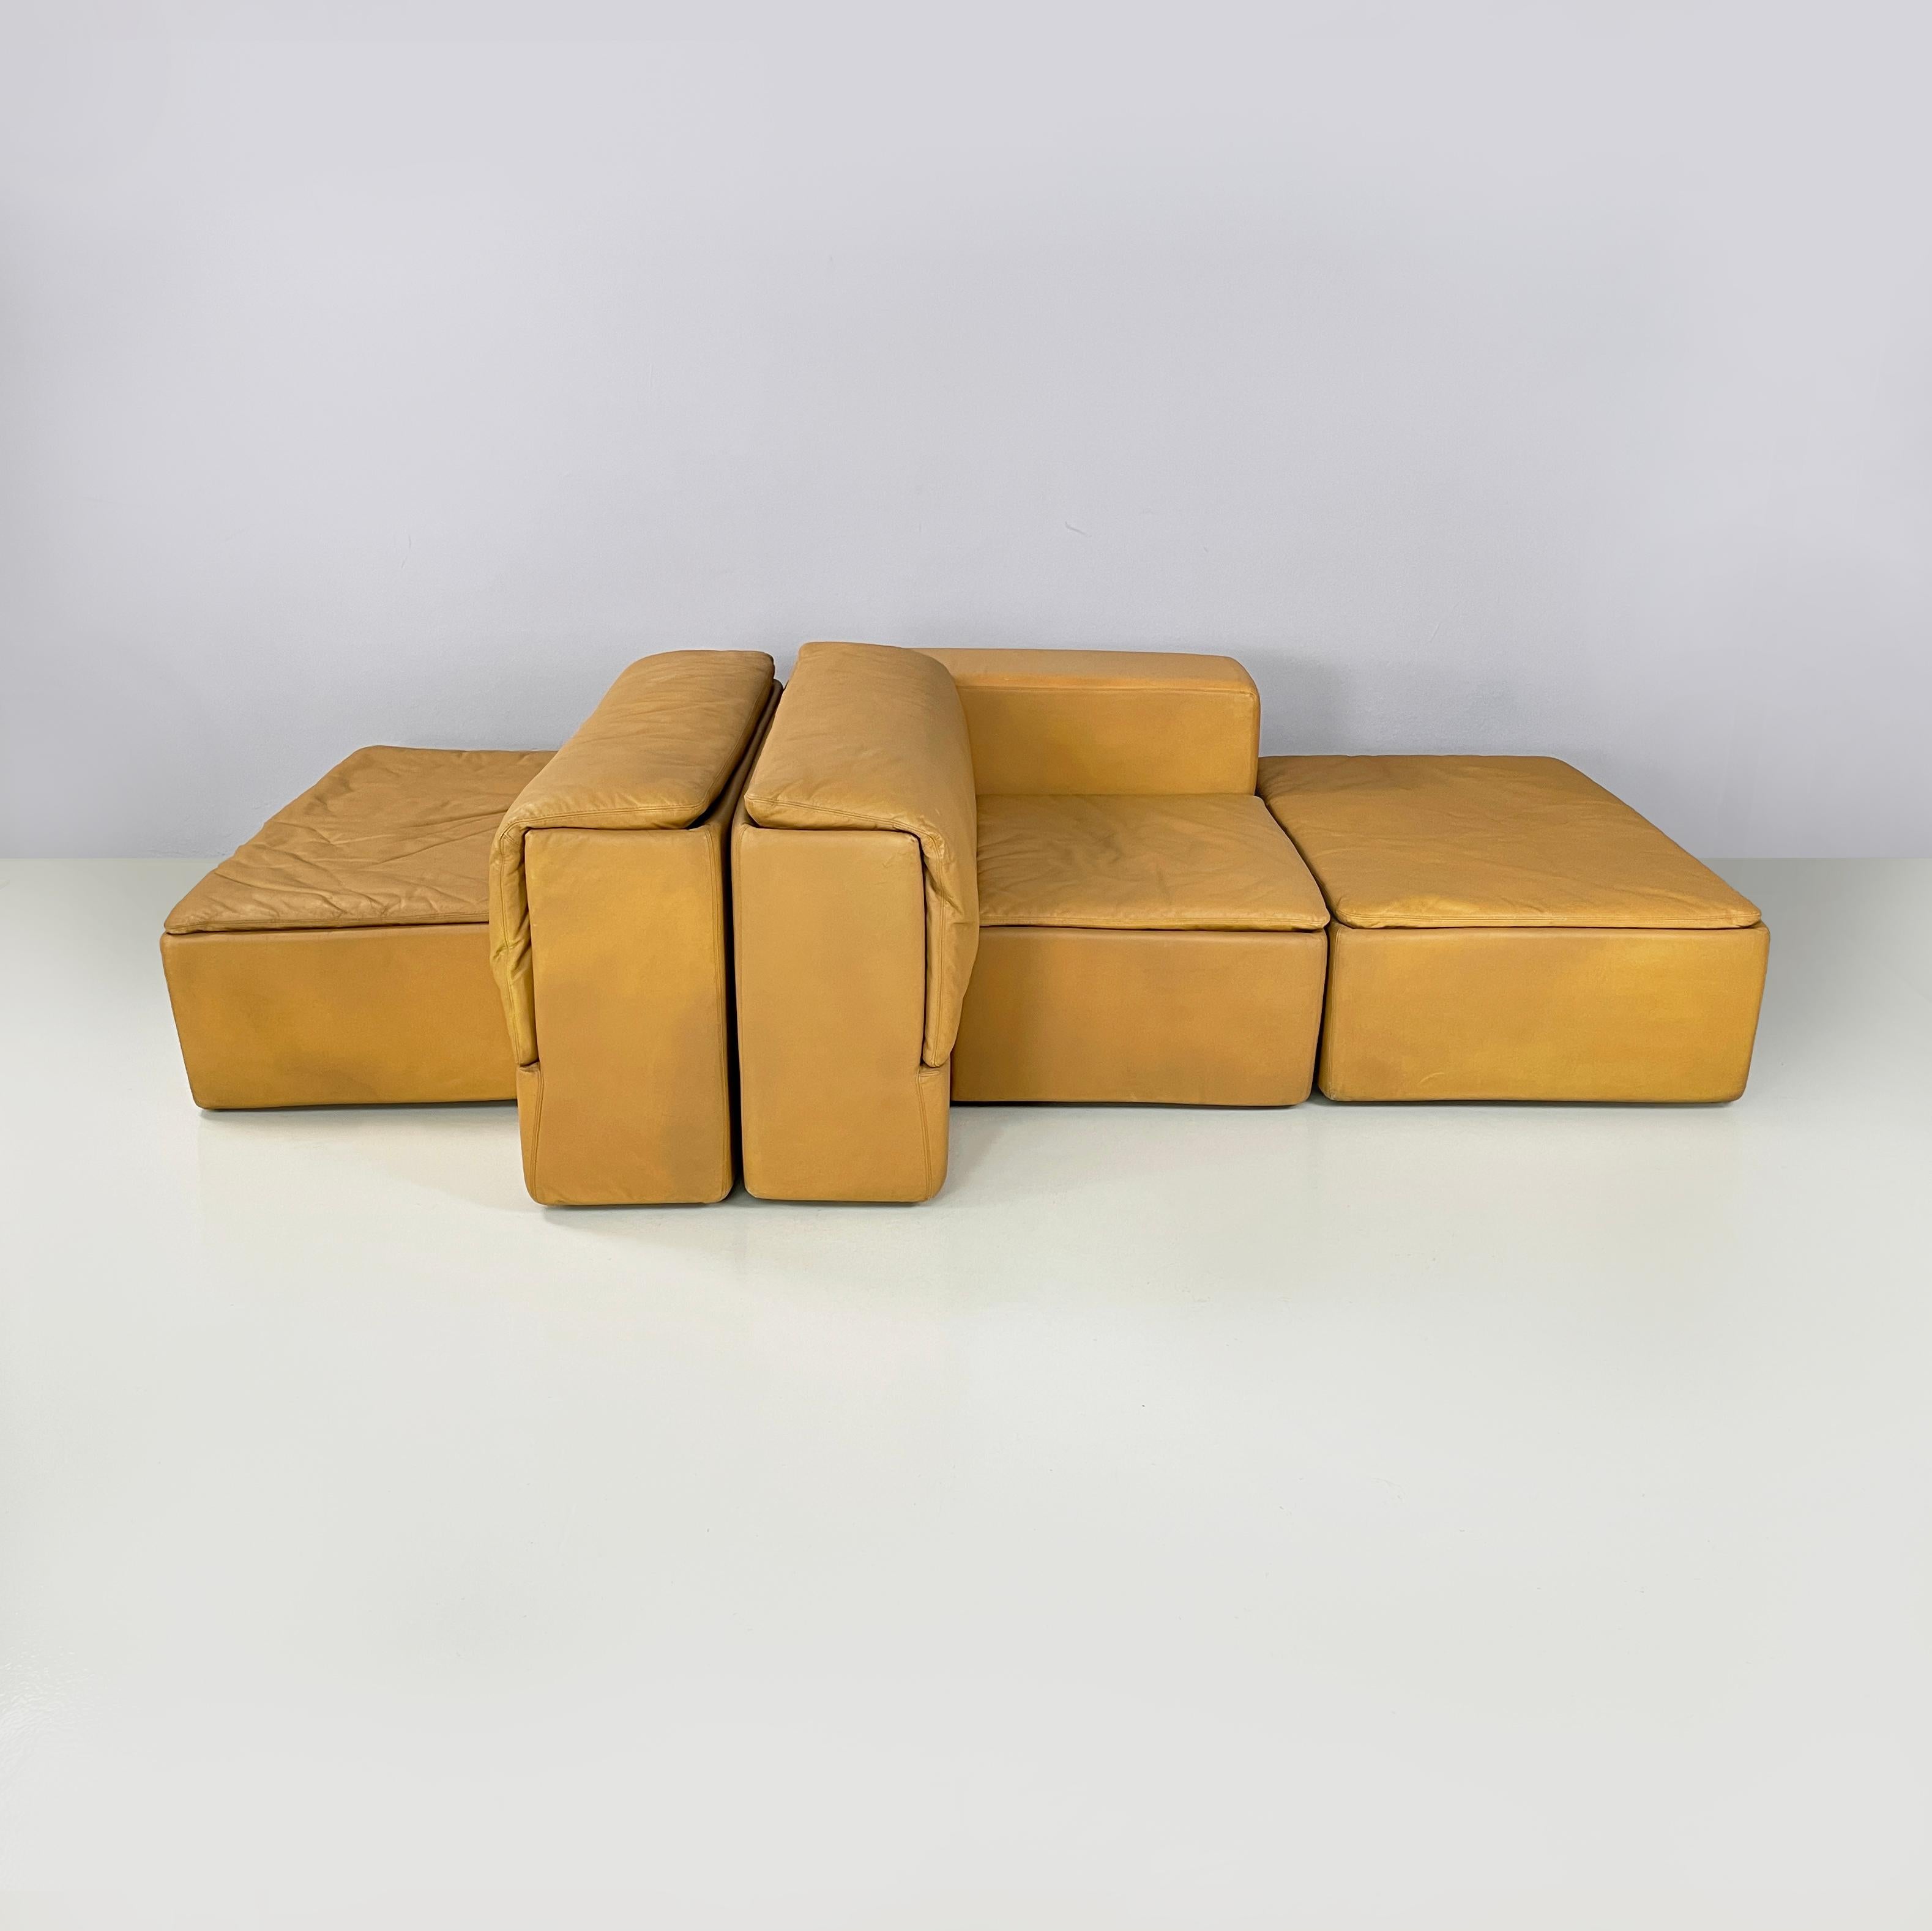 Italian modern Brown leather modular sofa Paione by Salocchi for Sormani, 1970s For Sale 1